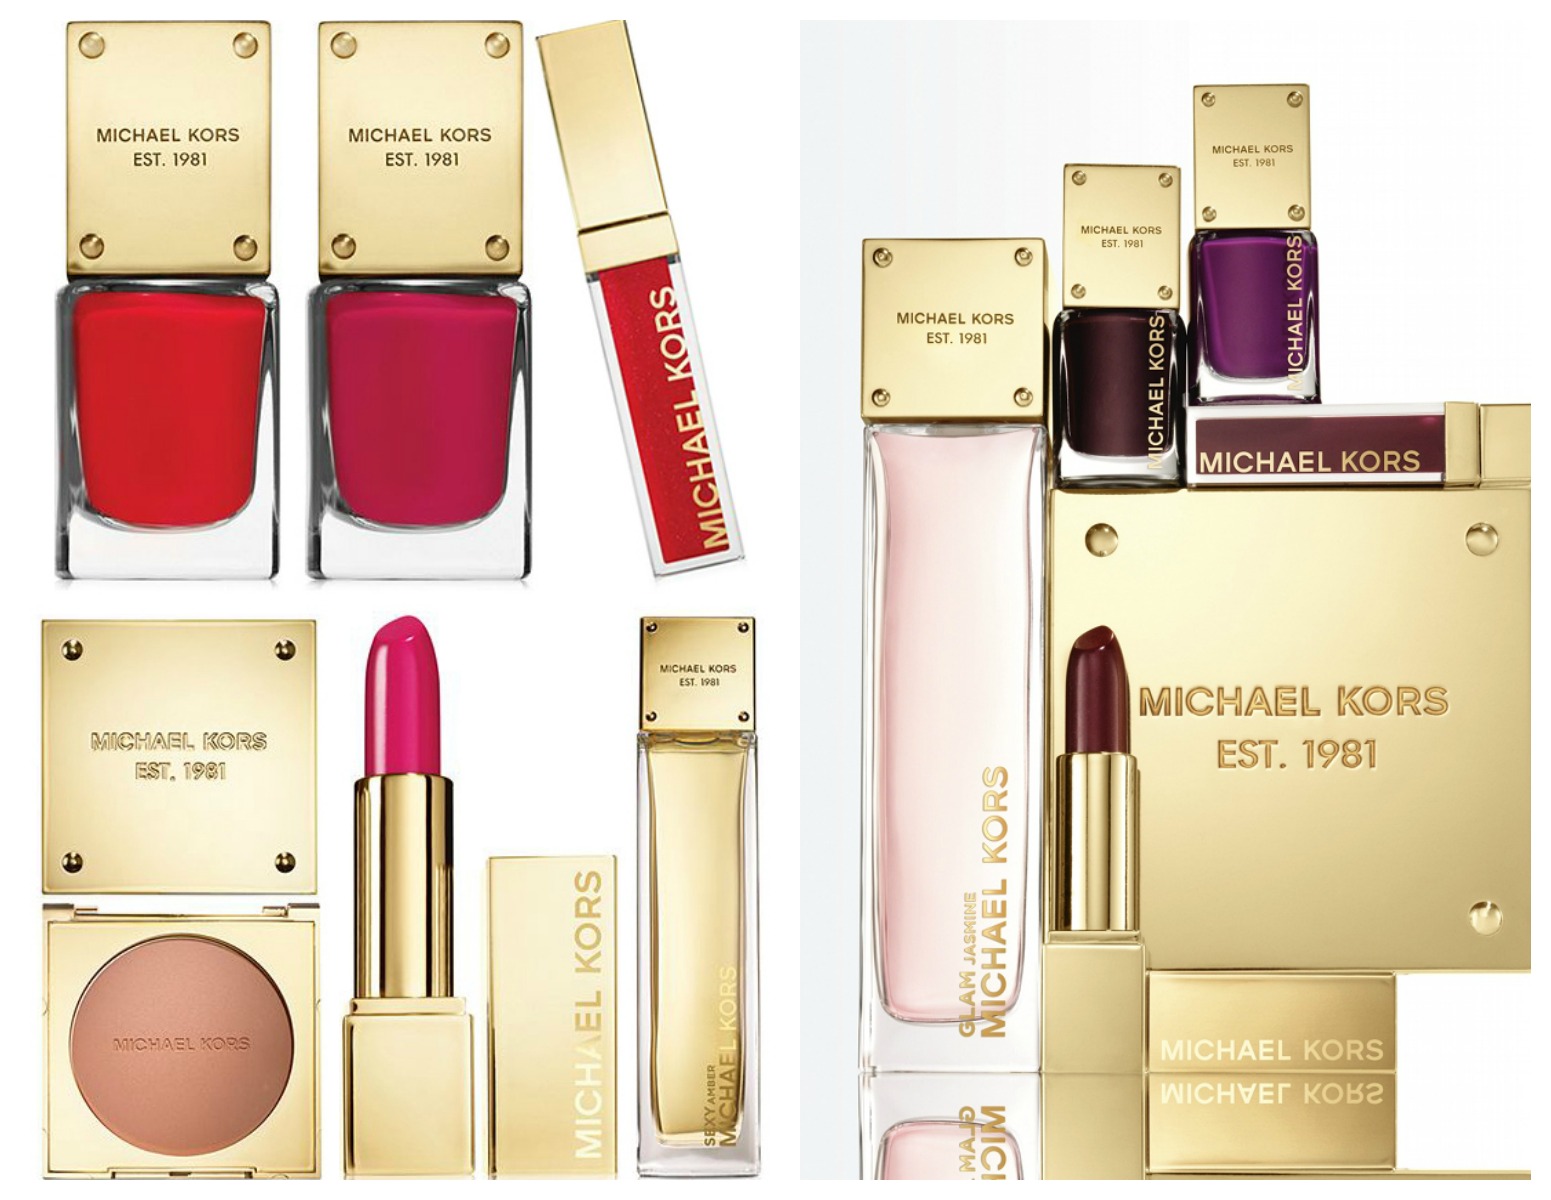 Michael Kors Cosmetics Launches at Arnotts: Colour Me Pleasantly ...